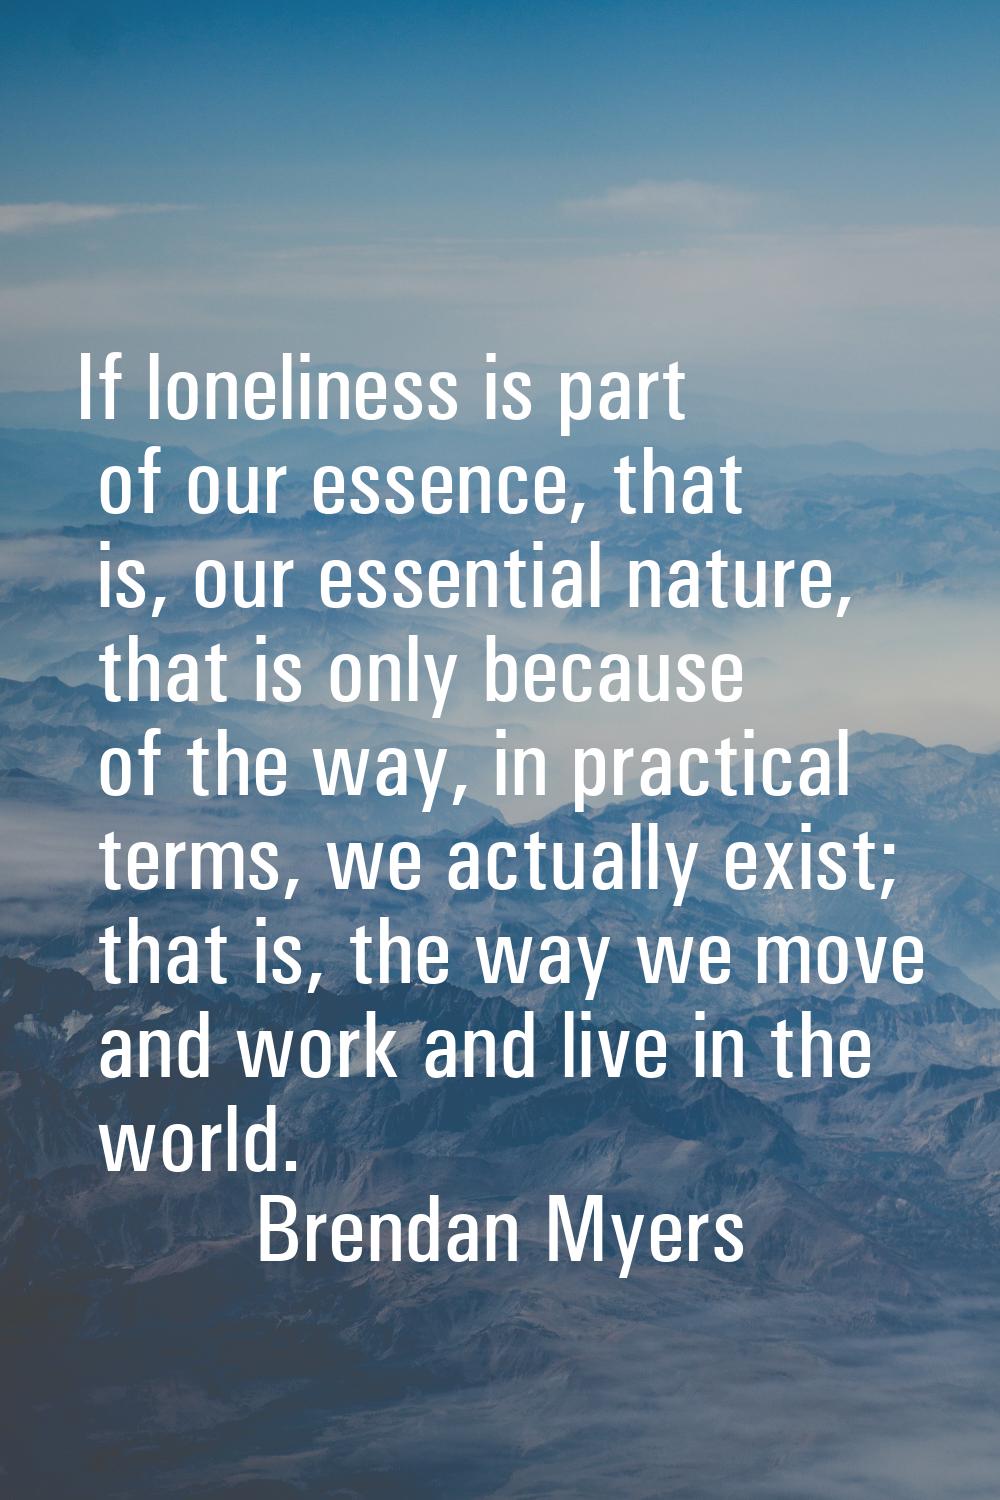 If loneliness is part of our essence, that is, our essential nature, that is only because of the wa